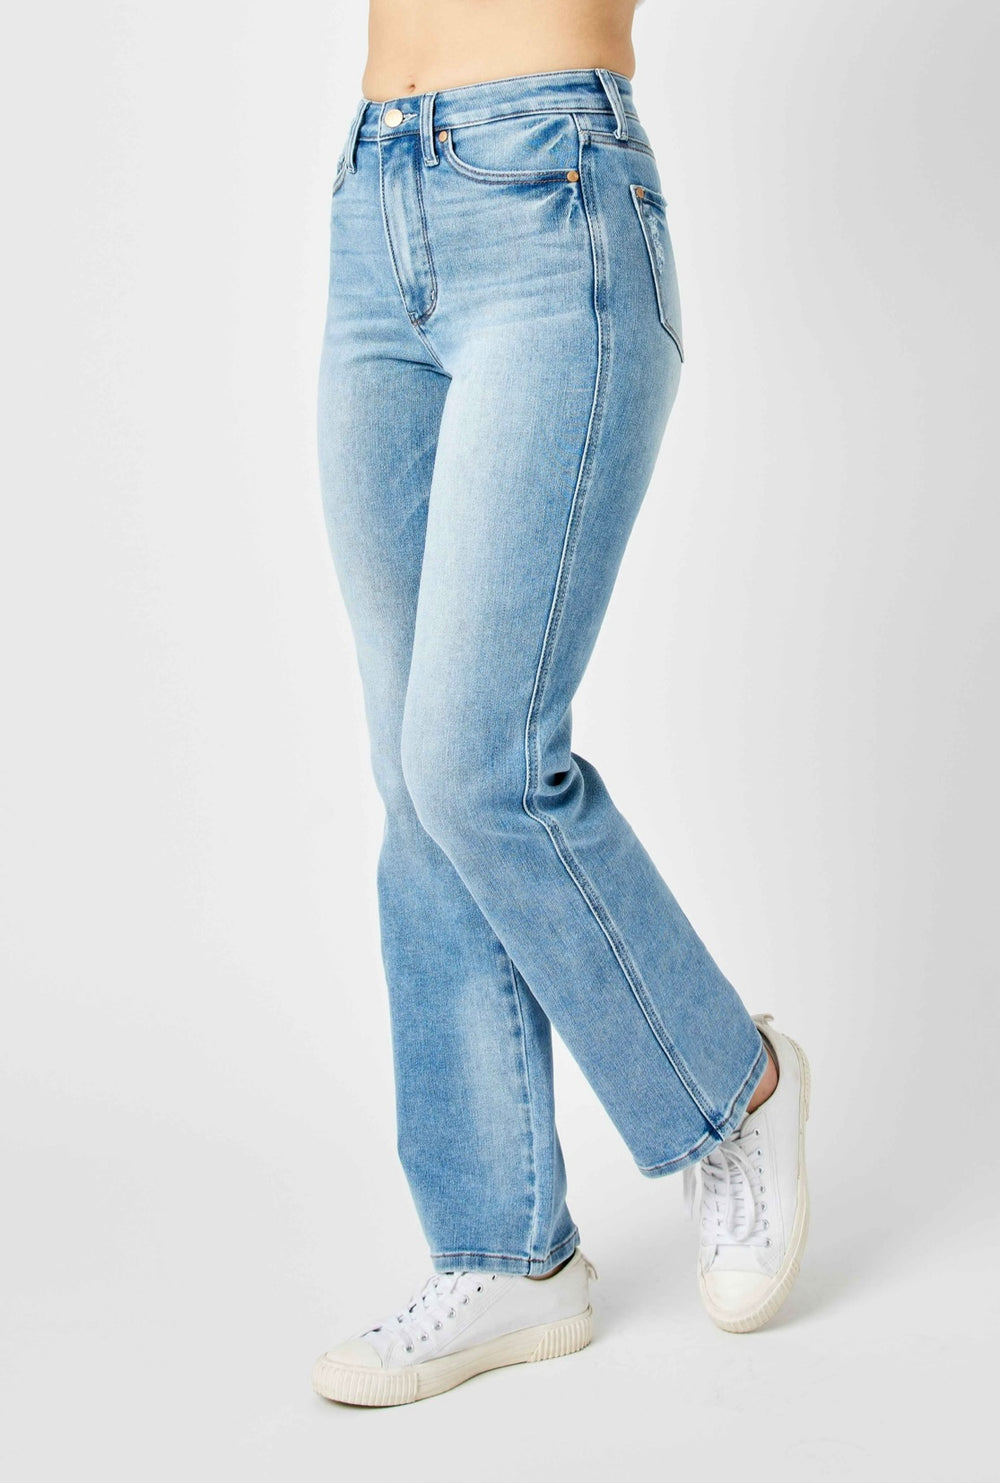 Judy Blue Adventure Jeans-Jeans-Judy Blue-Evergreen Boutique, Women’s Fashion Boutique in Santa Claus, Indiana